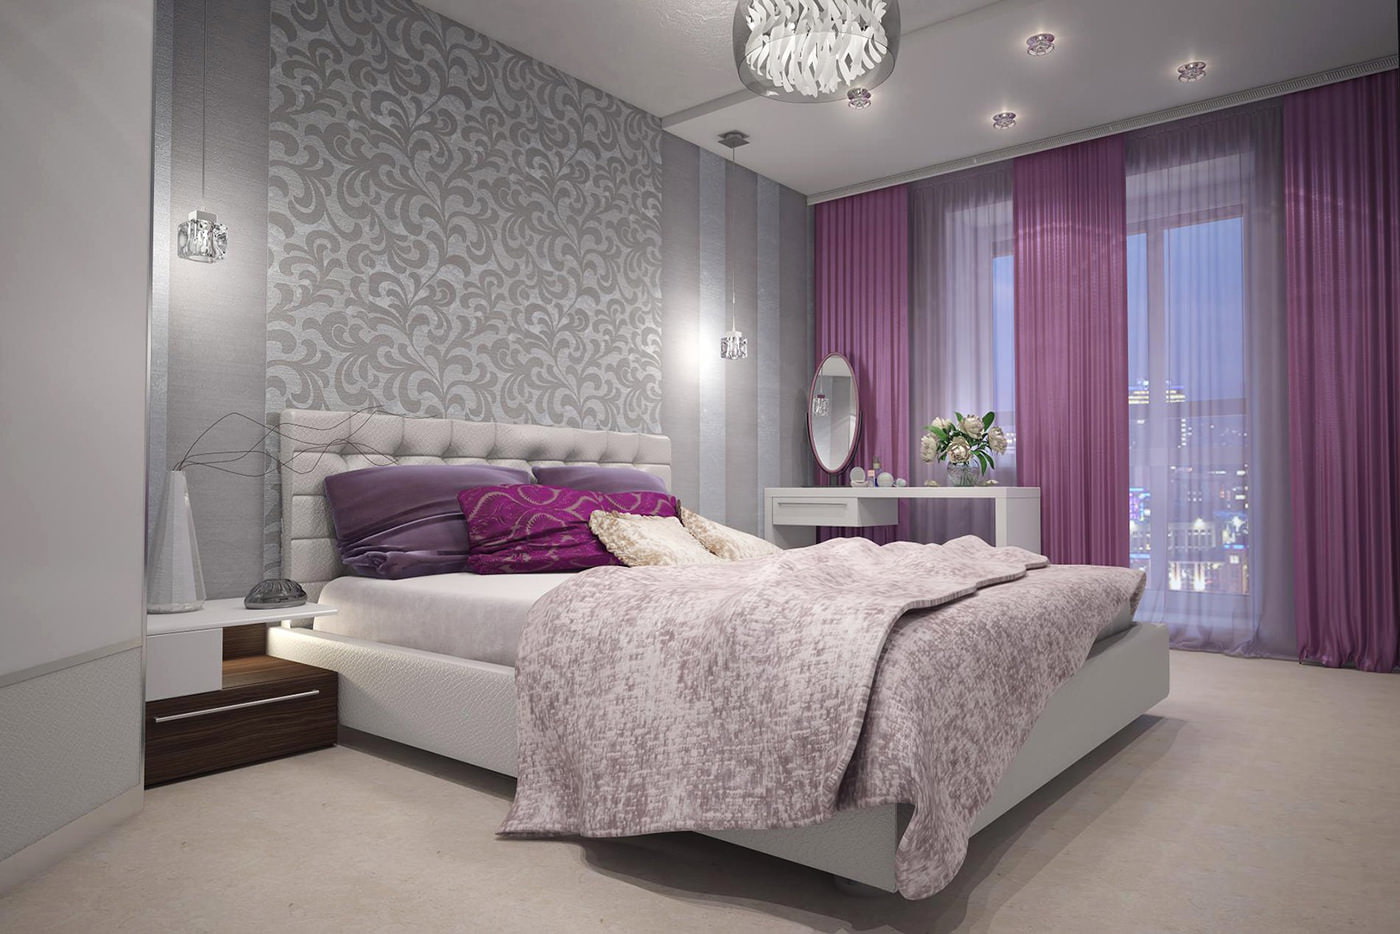 purple curtains in bedroom design with gray wallpaper